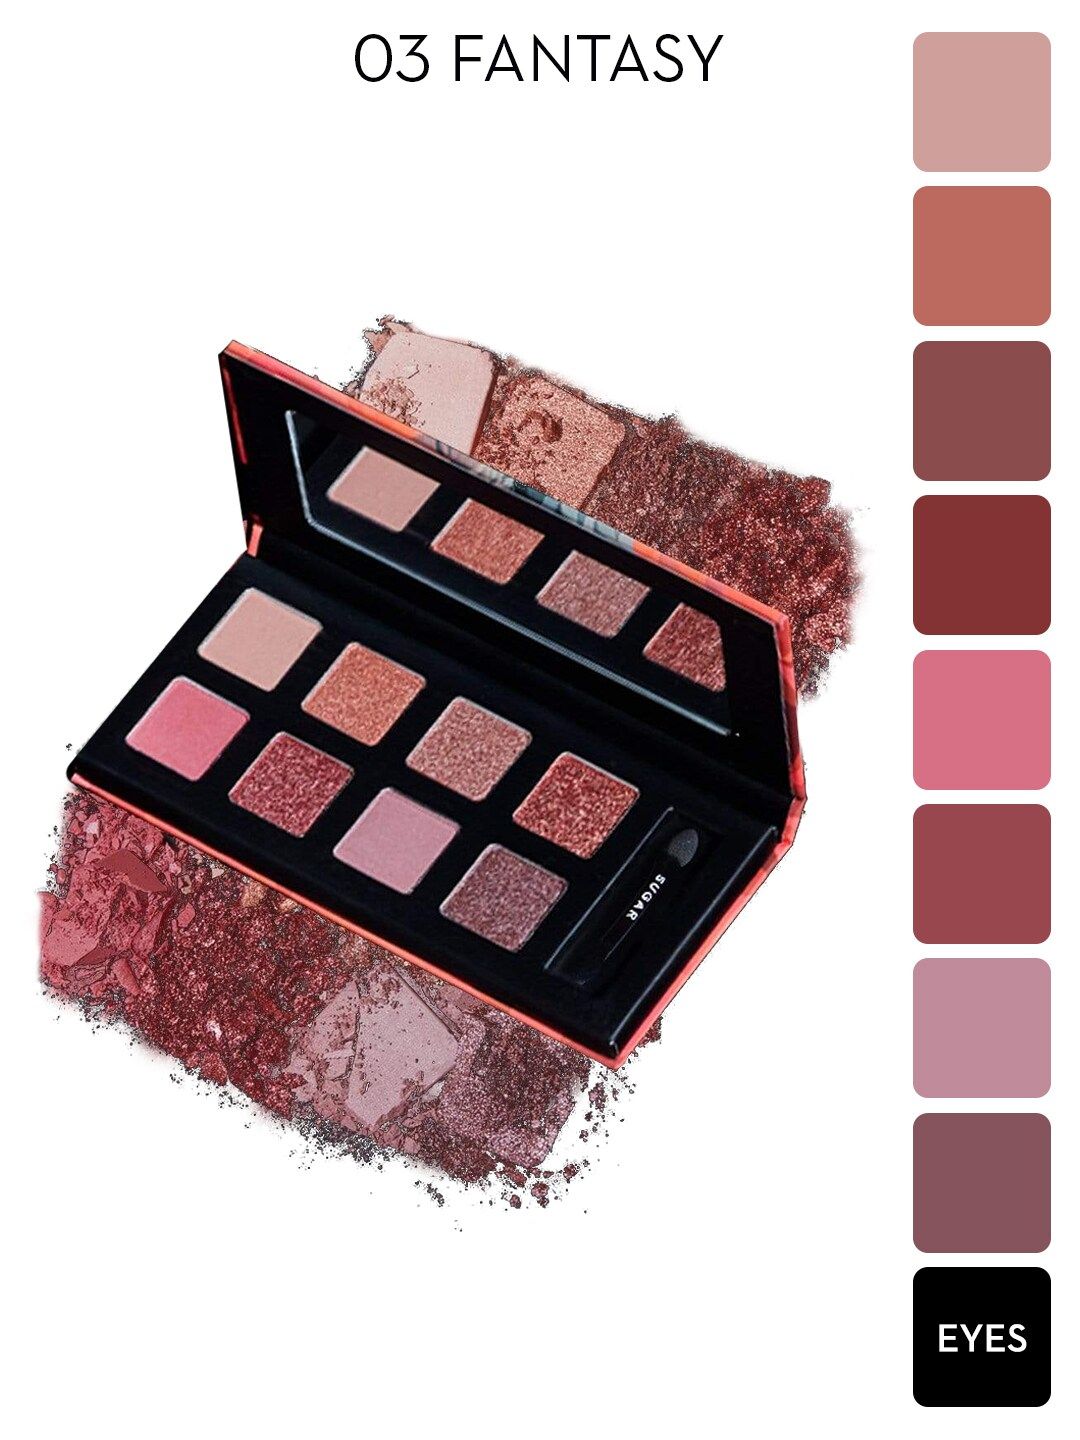 SUGAR Cosmetics Blend The Rules Eyeshadow Palette - 03 Fantasy Price in India